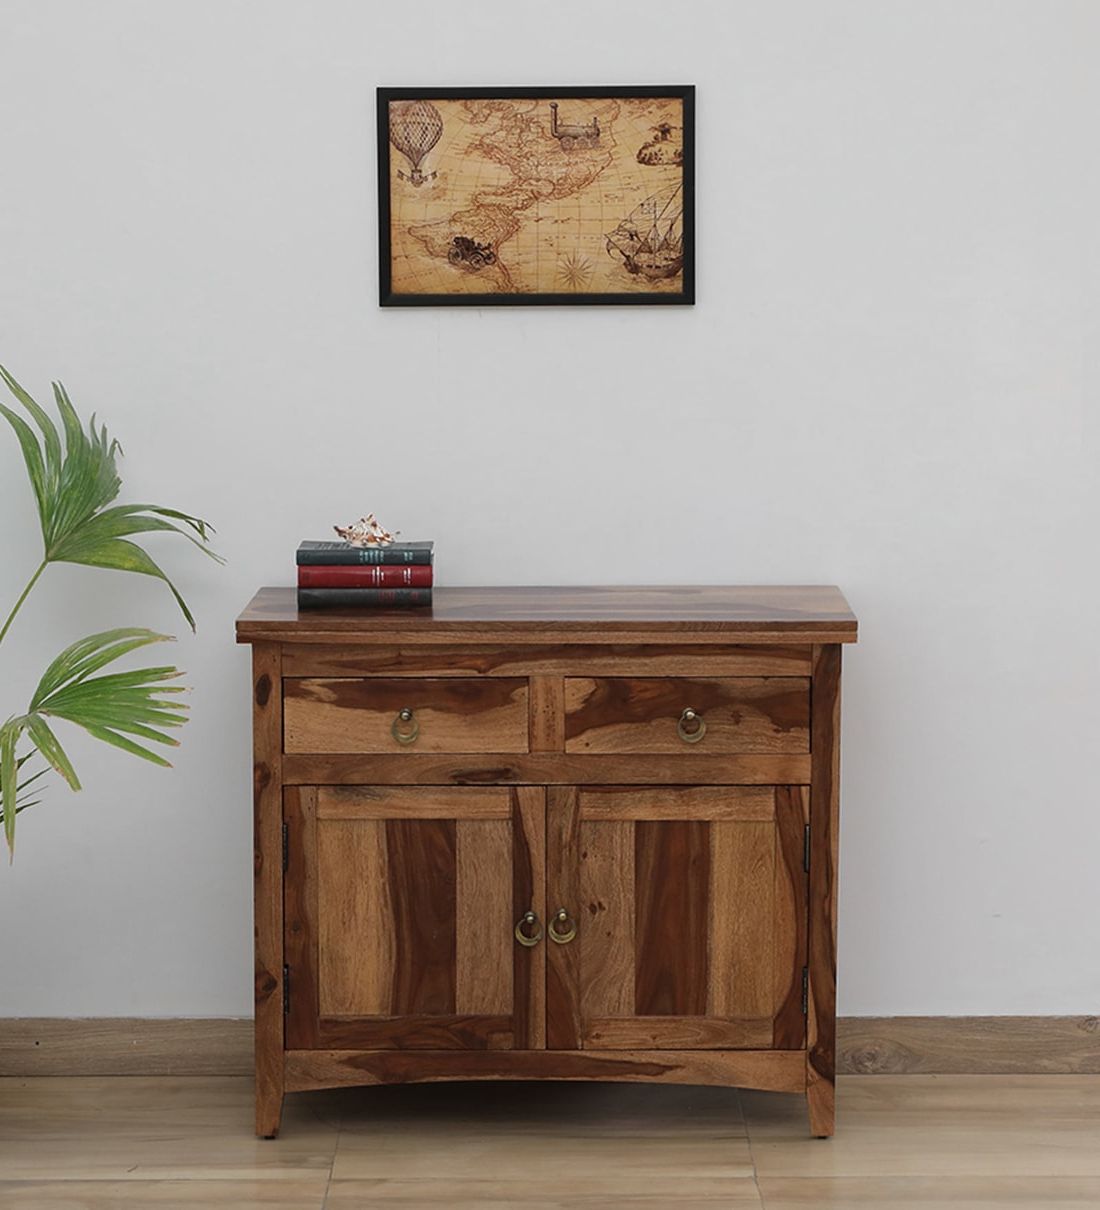 [%buy Biscay Sheesham Wood Sideboard In Scratch Resistant Rustic Teak Finish  At 2% Offwoodsworth From Pepperfry | Pepperfry Within Well Known Sideboards With Breathable Mesh Doors|sideboards With Breathable Mesh Doors Pertaining To Best And Newest Buy Biscay Sheesham Wood Sideboard In Scratch Resistant Rustic Teak Finish  At 2% Offwoodsworth From Pepperfry | Pepperfry|widely Used Sideboards With Breathable Mesh Doors Regarding Buy Biscay Sheesham Wood Sideboard In Scratch Resistant Rustic Teak Finish  At 2% Offwoodsworth From Pepperfry | Pepperfry|widely Used Buy Biscay Sheesham Wood Sideboard In Scratch Resistant Rustic Teak Finish  At 2% Offwoodsworth From Pepperfry | Pepperfry Inside Sideboards With Breathable Mesh Doors%] (View 6 of 15)